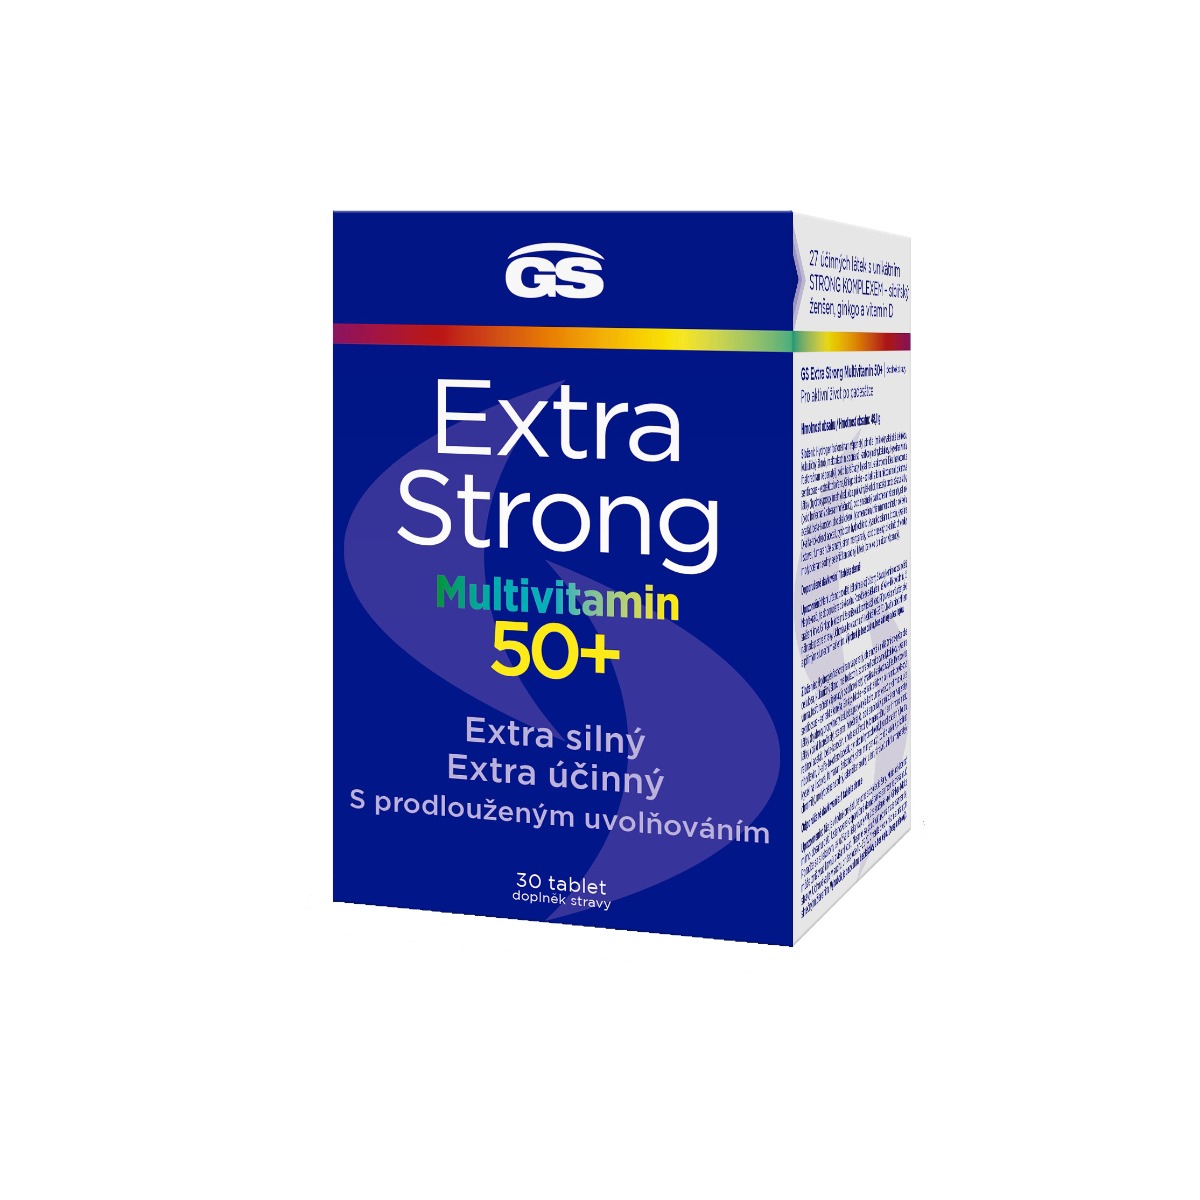 GS Extra Strong Multivitamin 50+ 30 tablet GS